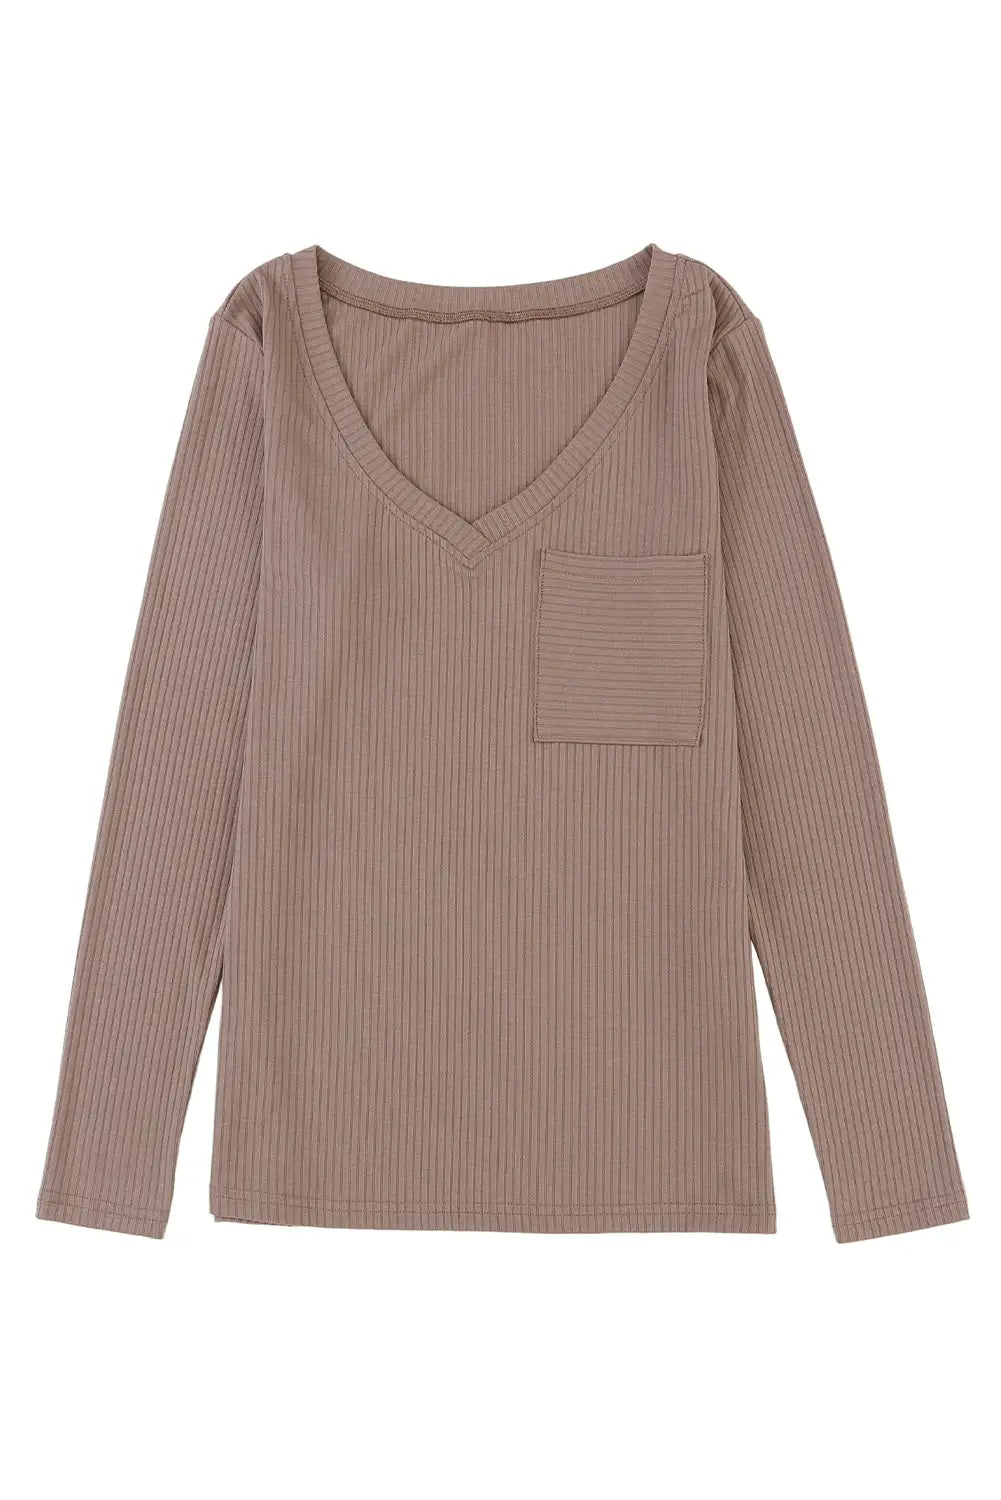 Khaki ribbed knit patched chest pocket v neck top - long sleeve tops